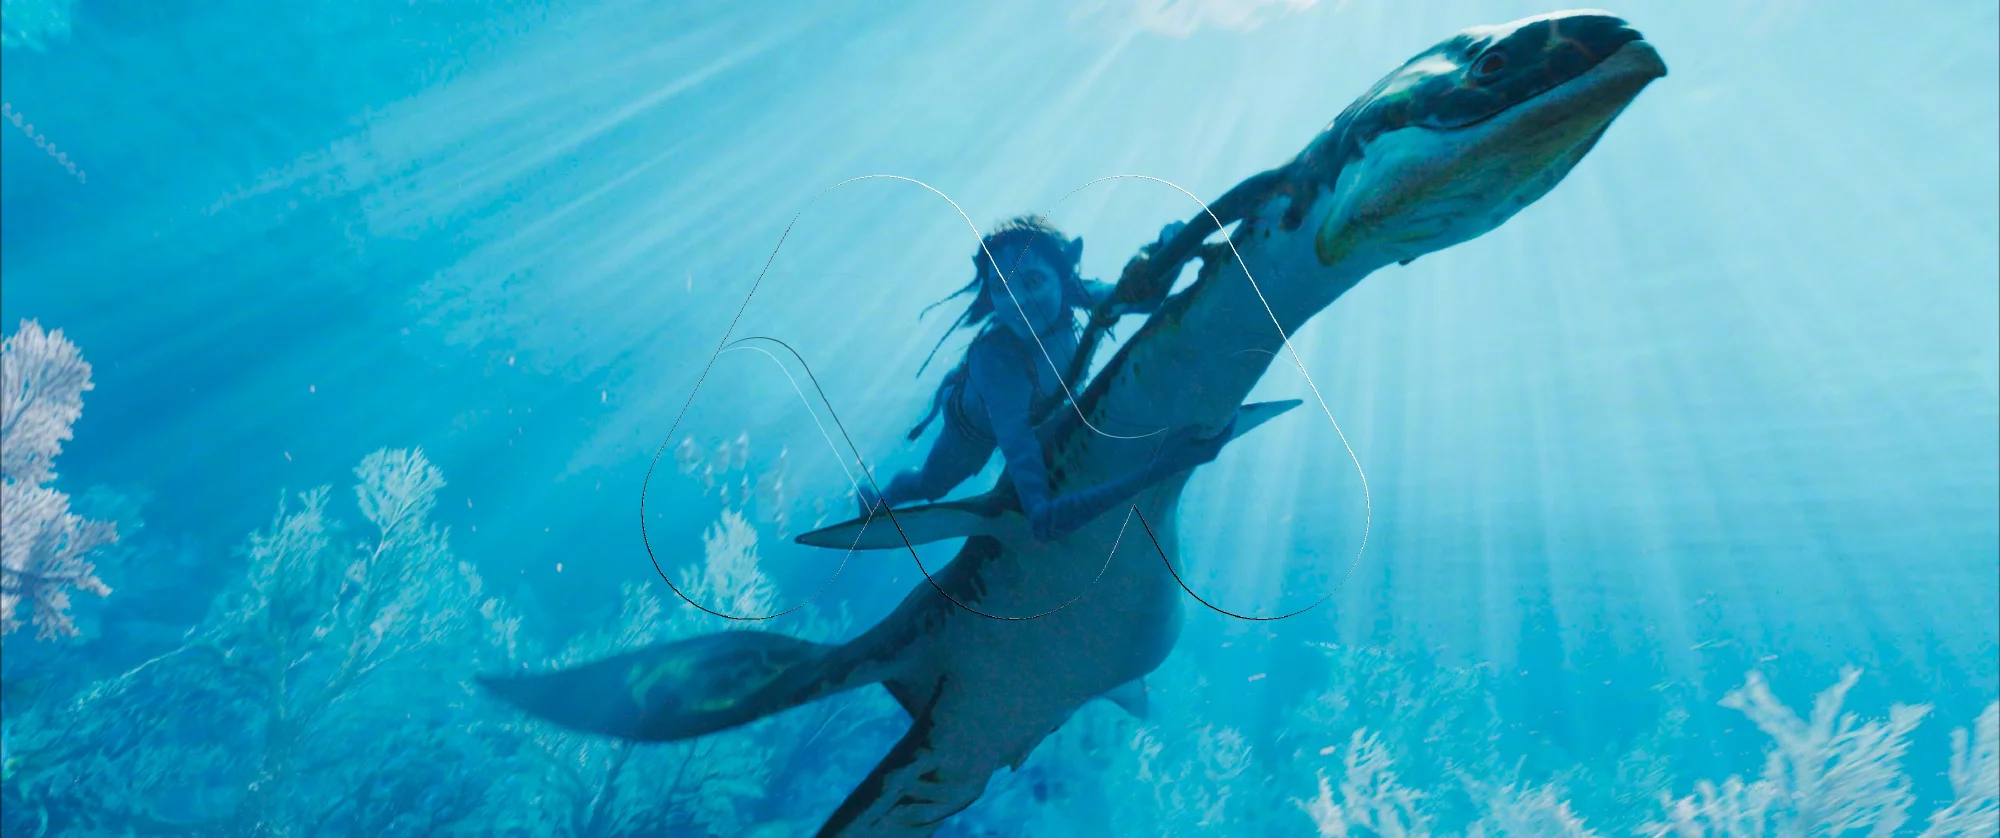 avatar-the-way-of-water-exposes-massive-new-stills-5